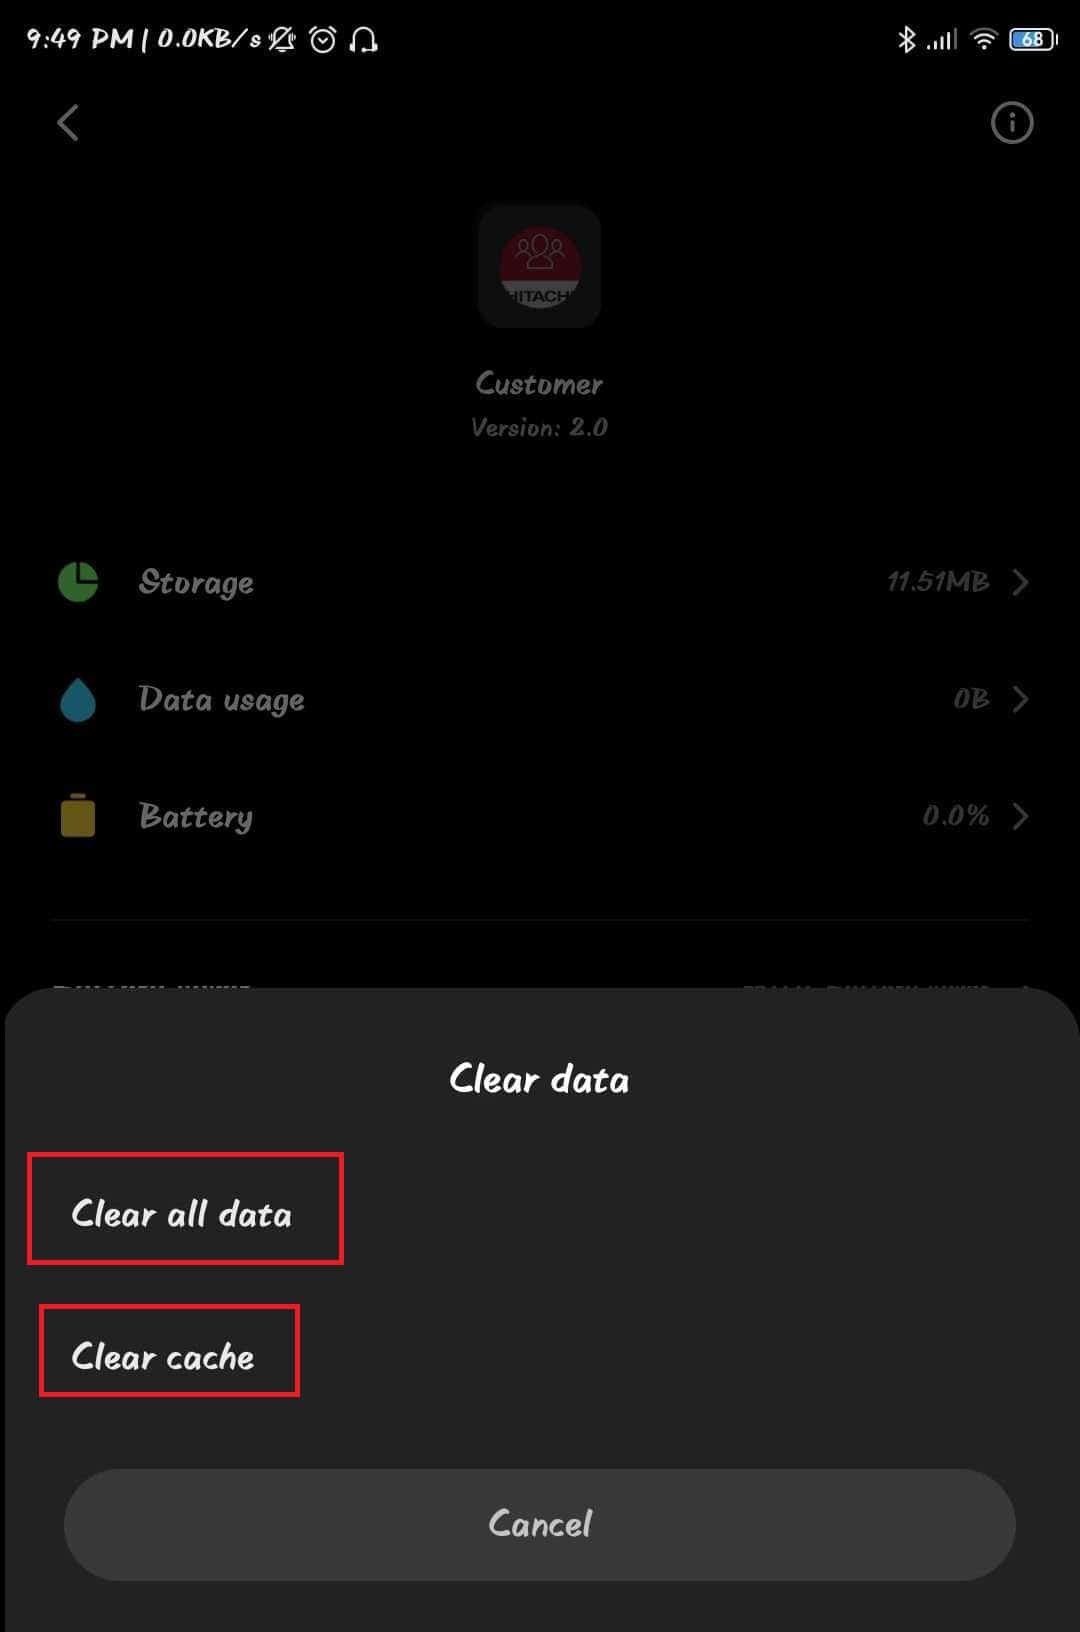 By tapping on both “Clear Data” and “Clear Cache,” you have essentially removed any extra data from the application.